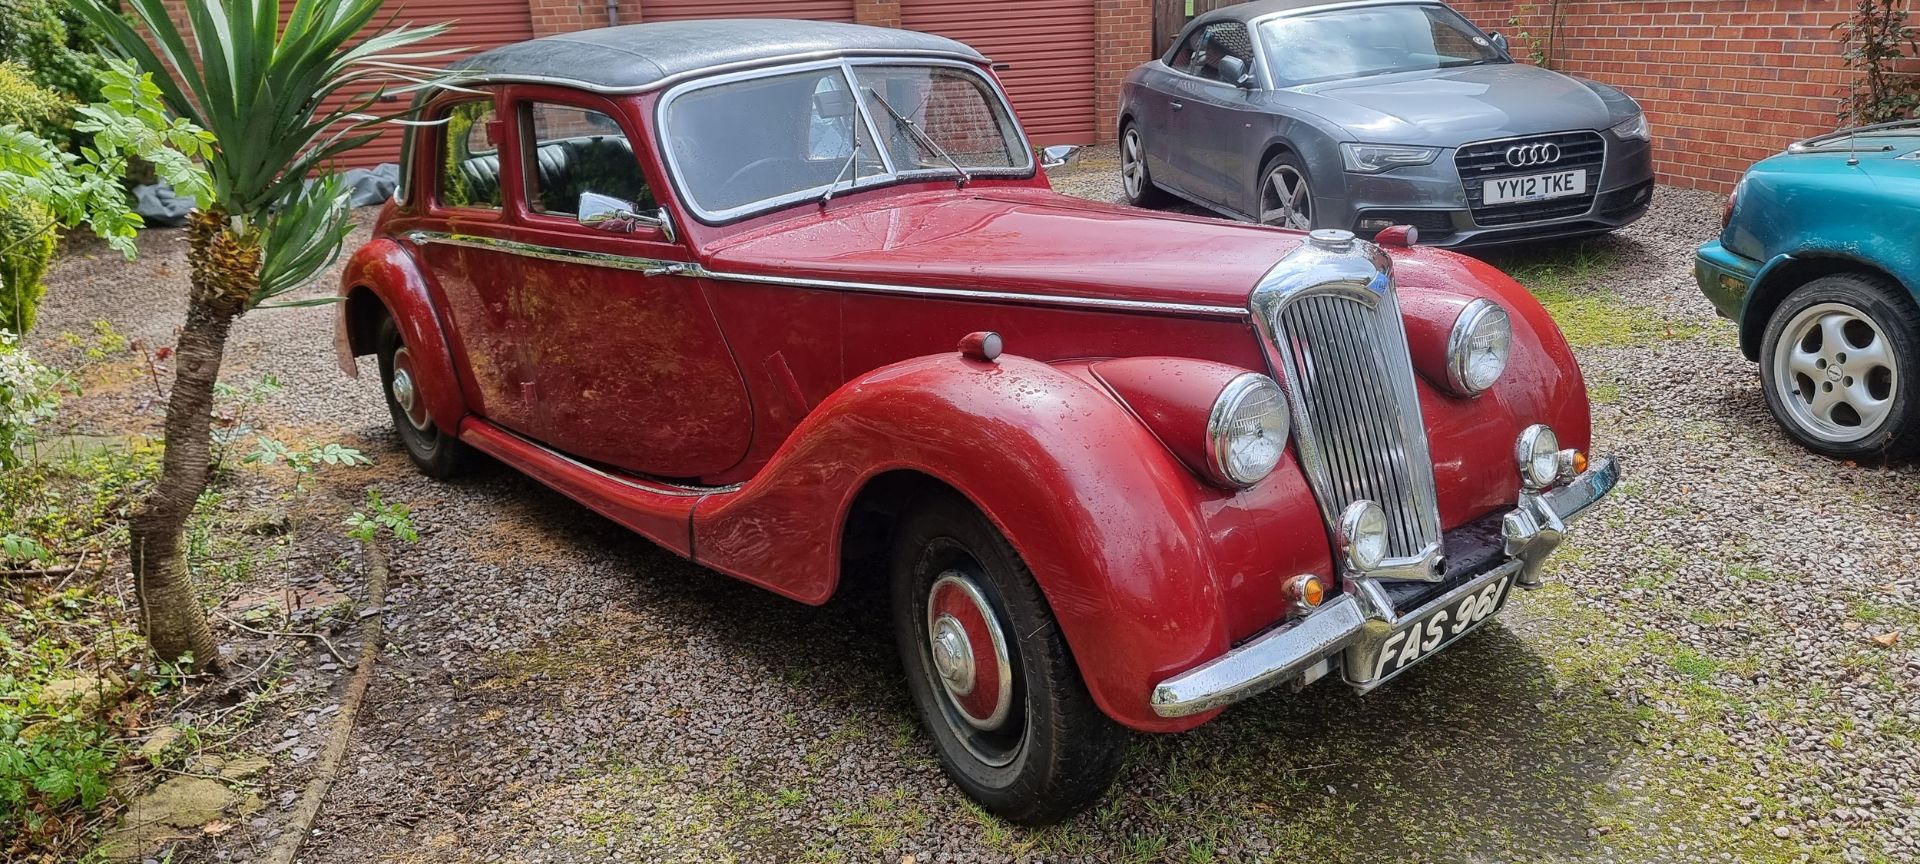 1951 Riley RMB, 2500cc. Registration number FAS 961. Chassis number 61S/8258. Engine number 6965.